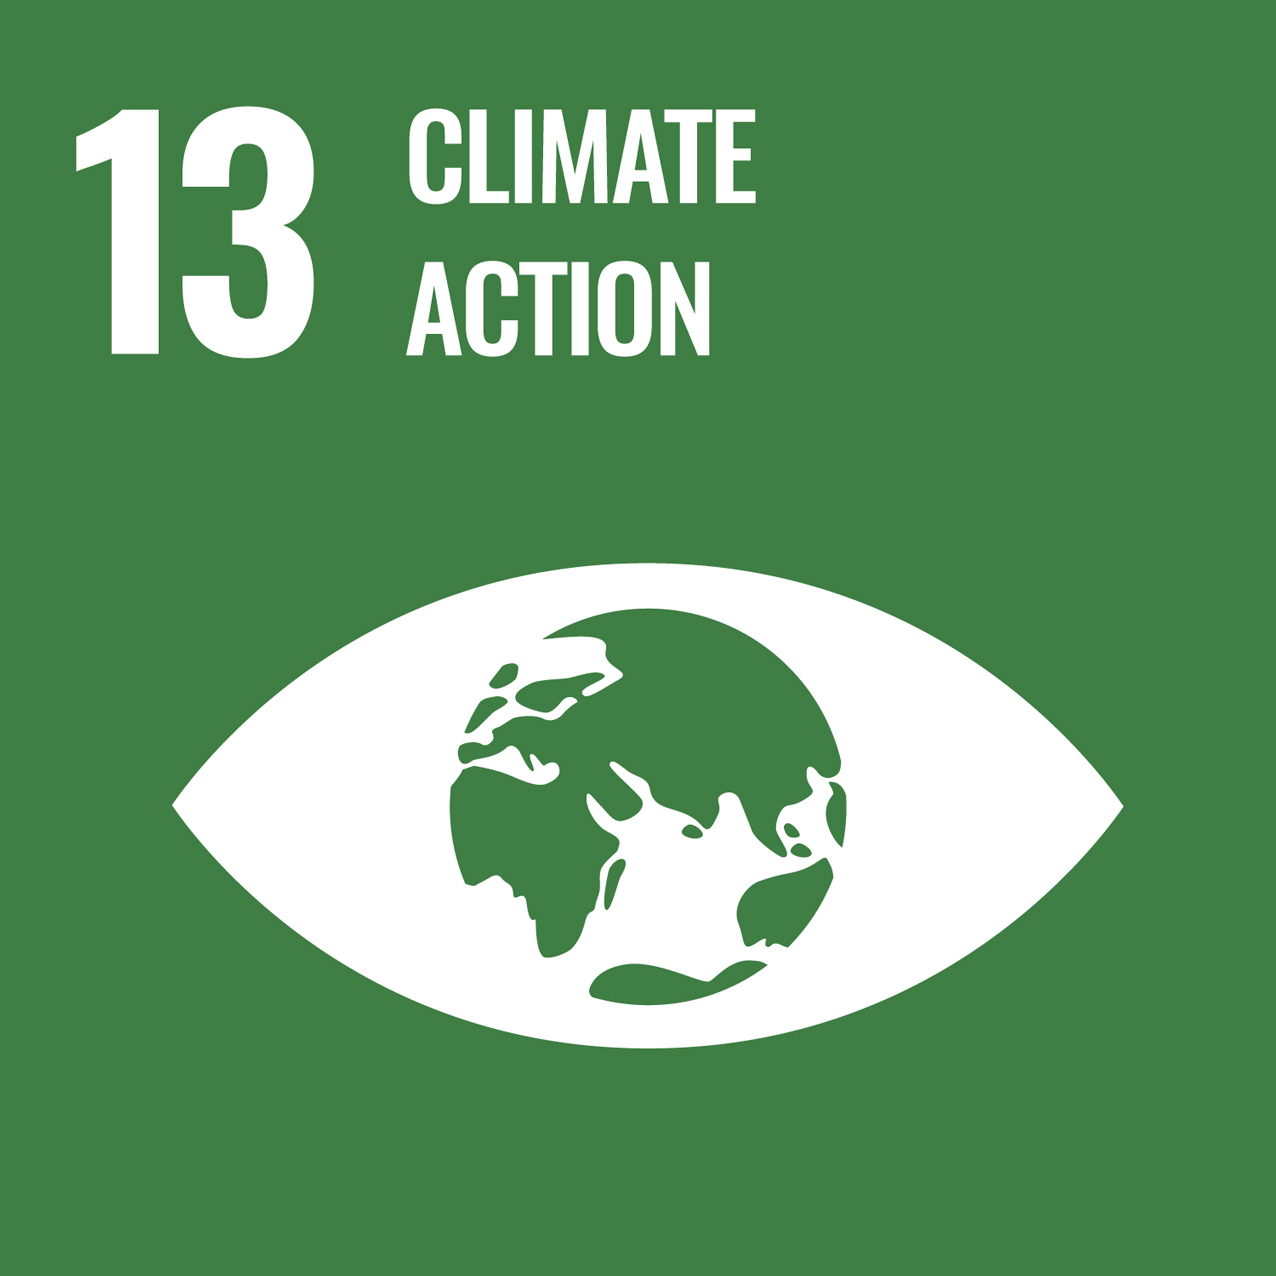 Goal 13. Take urgent action to combat climate change and its impacts